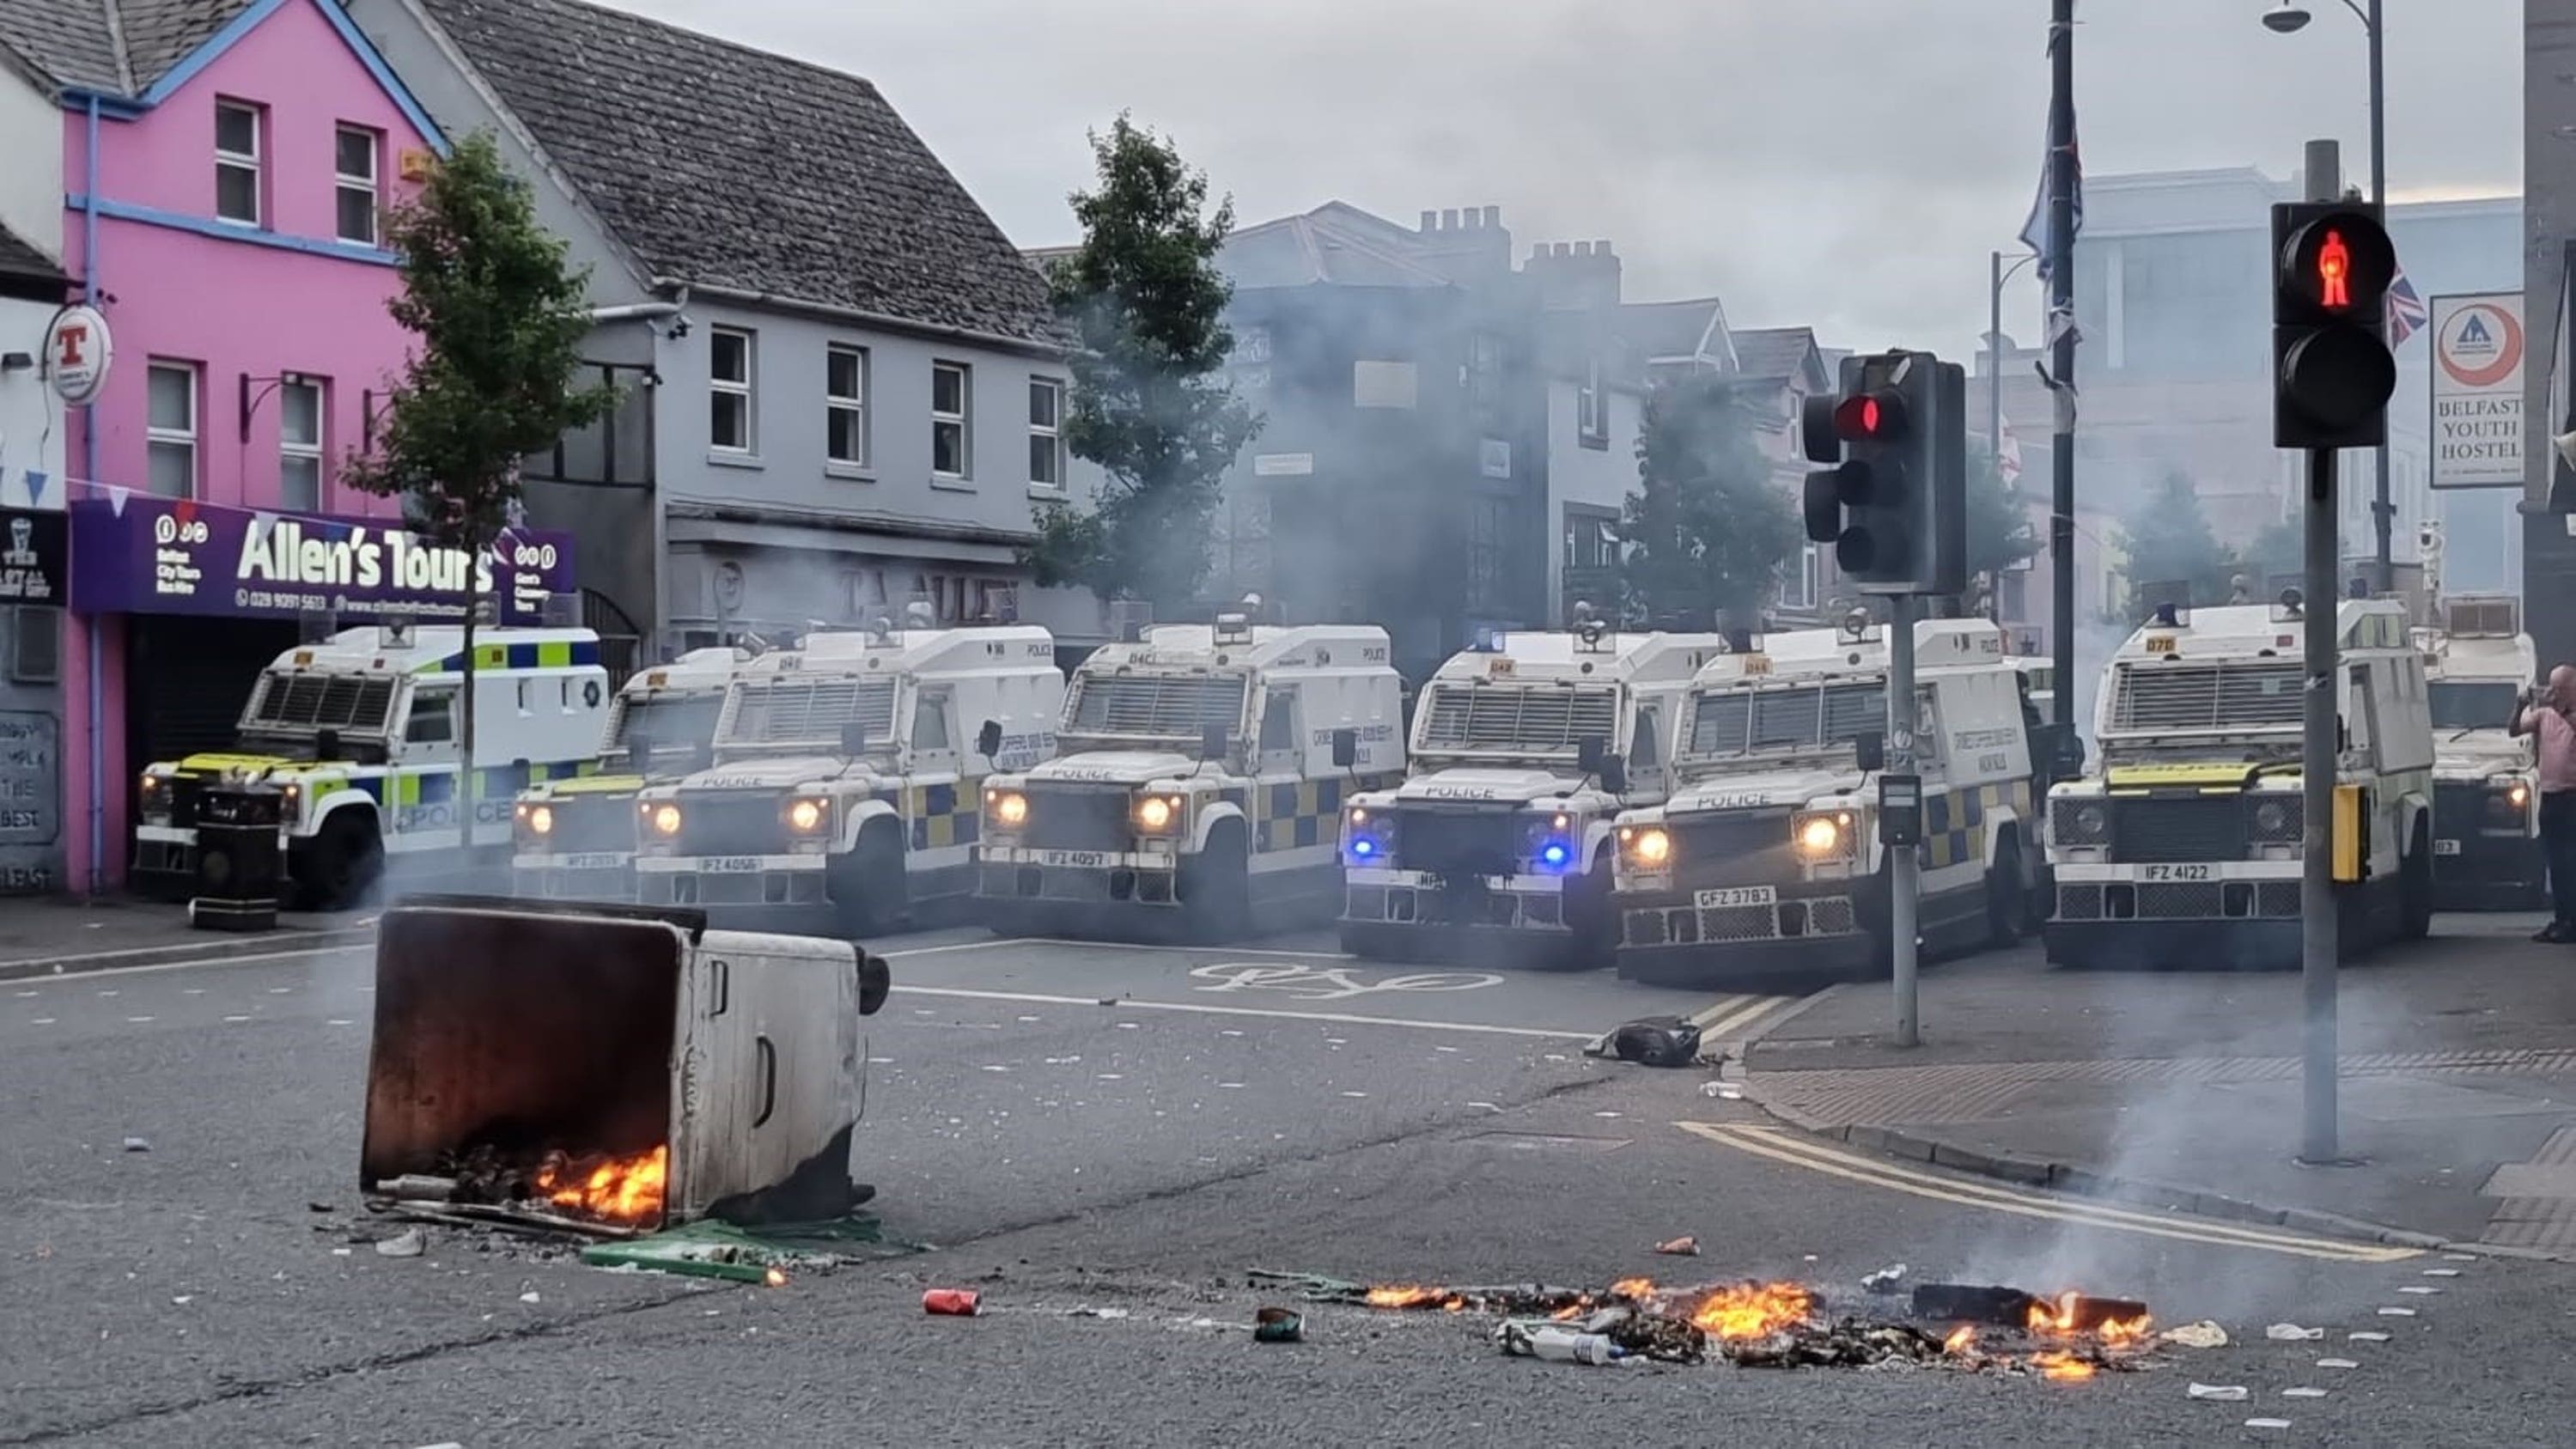 Paramilitary ‘element’ suspected in latest disorder in Belfast